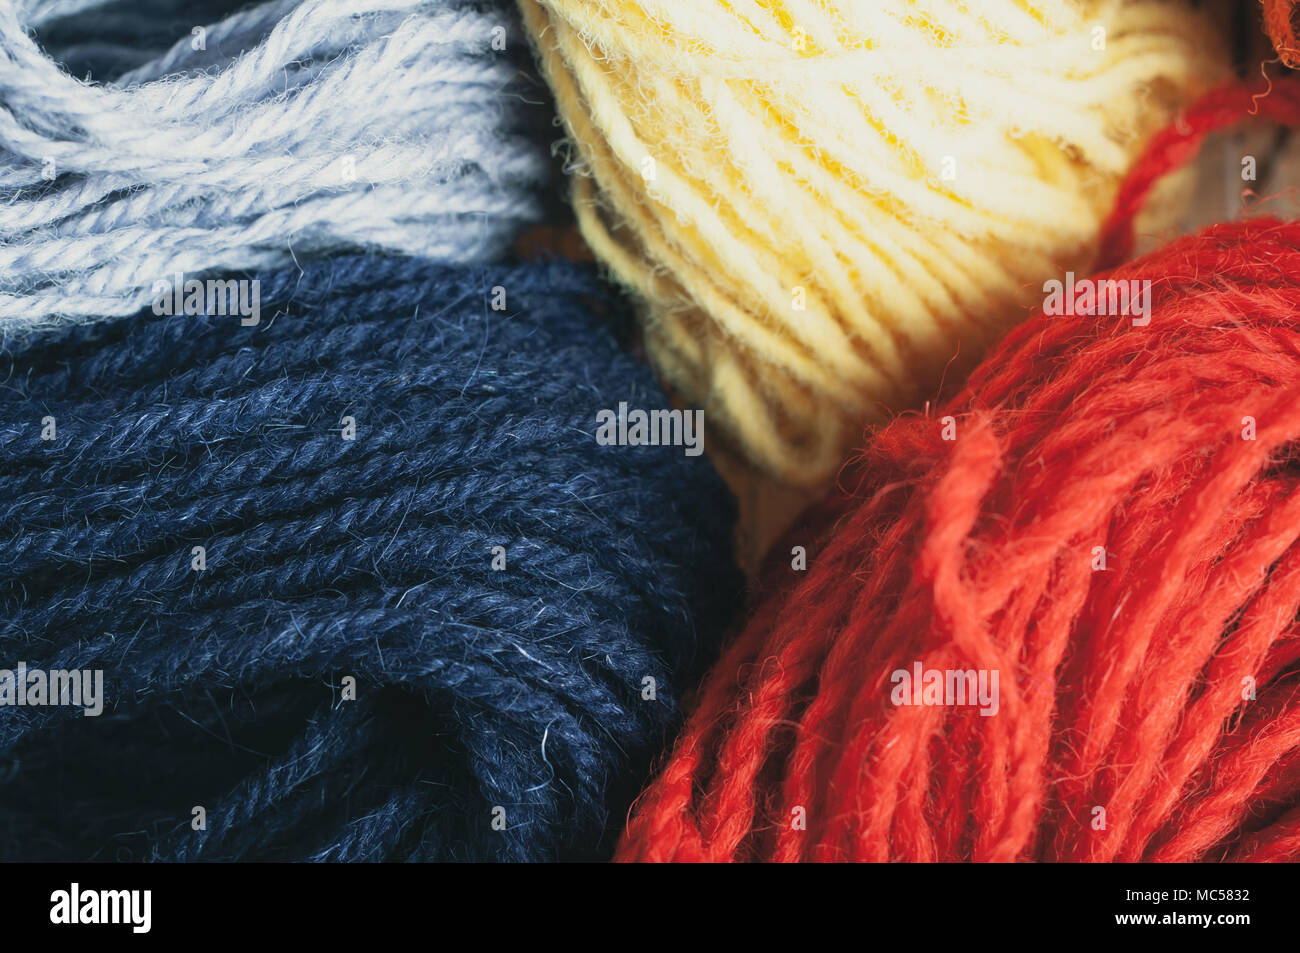 Knitting Wool Yarns Background With Shades Of Blue Red And